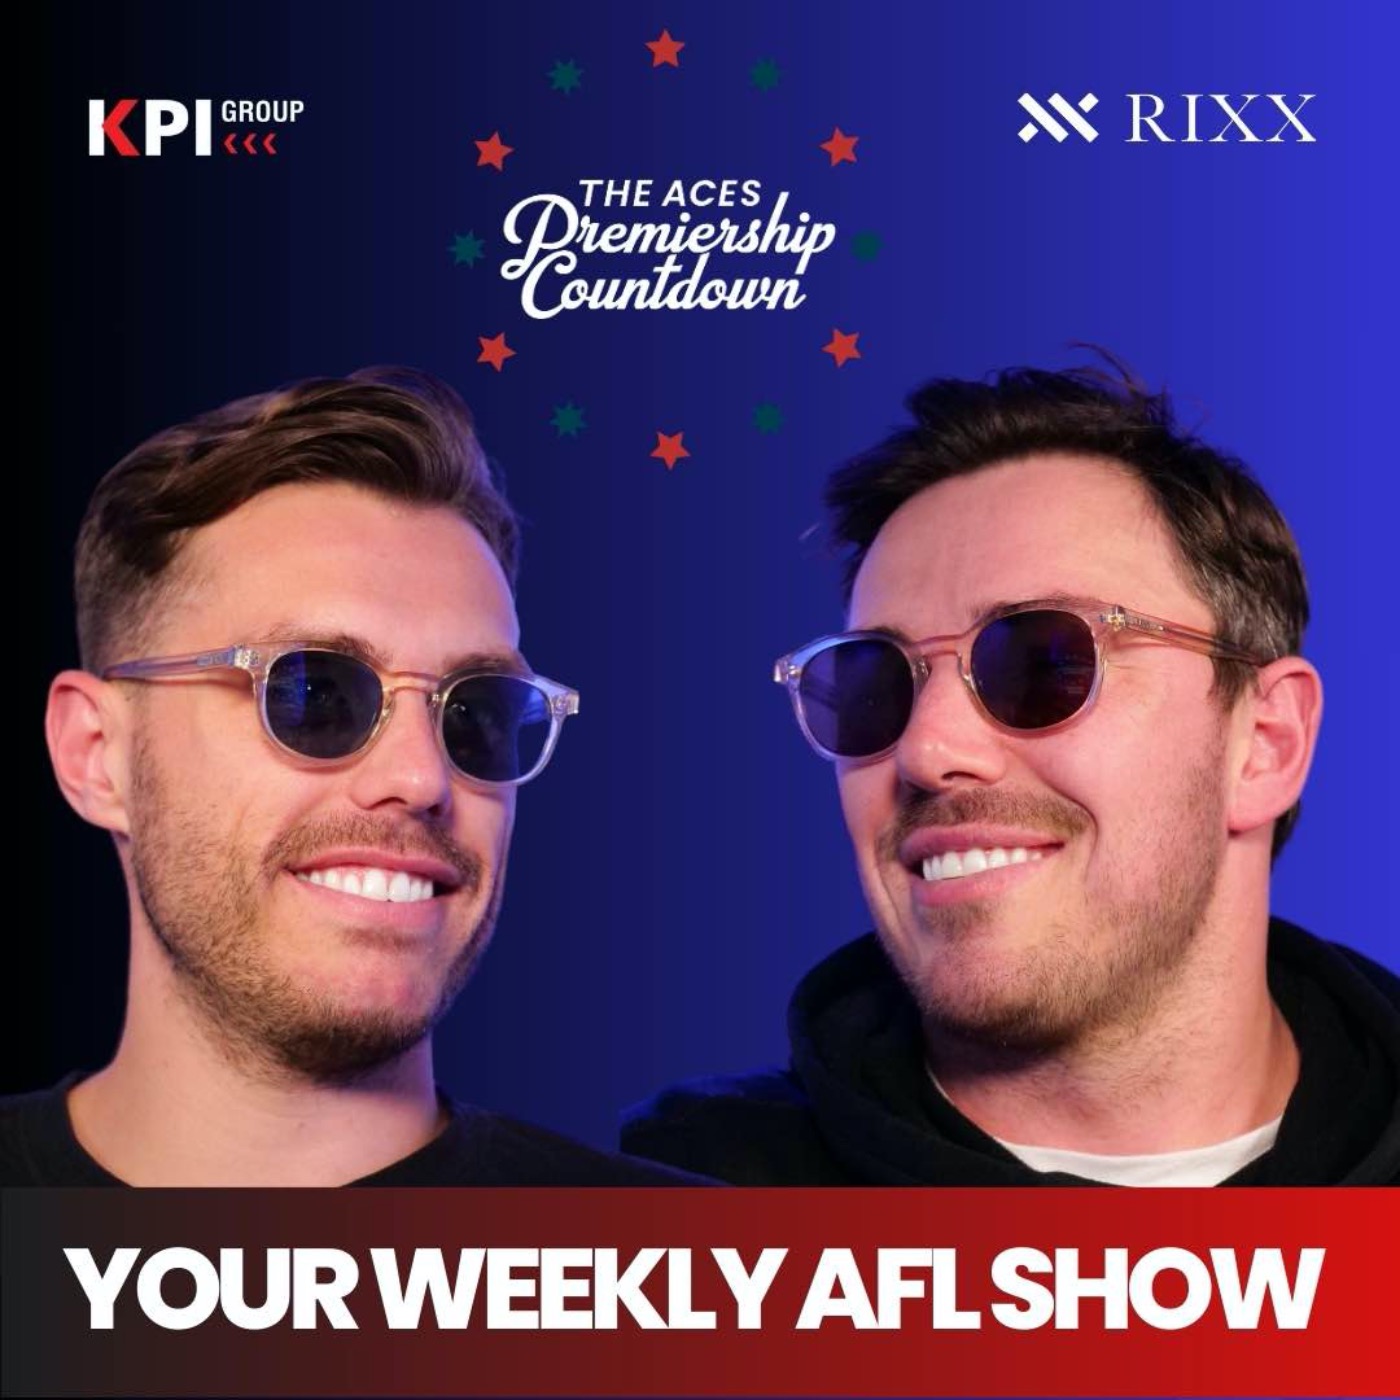 APC 🏆 SA security guards, Pigs on a juice cleanse & AFL Round 3 preview!